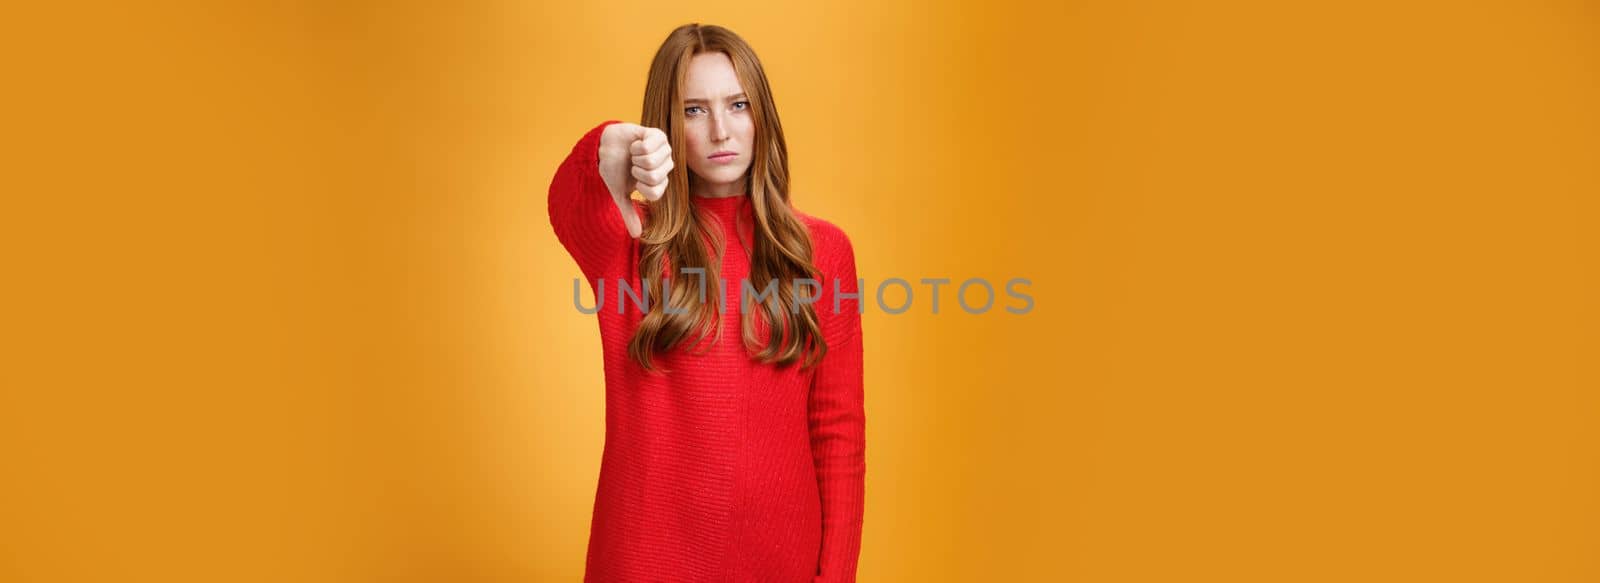 Disappointed upset and serious-looking attractive 20s redhead woman in red knitted dress frowning in dislike looking with judgement, showing thumb down in aversion and dissatisfaction over orange wall.